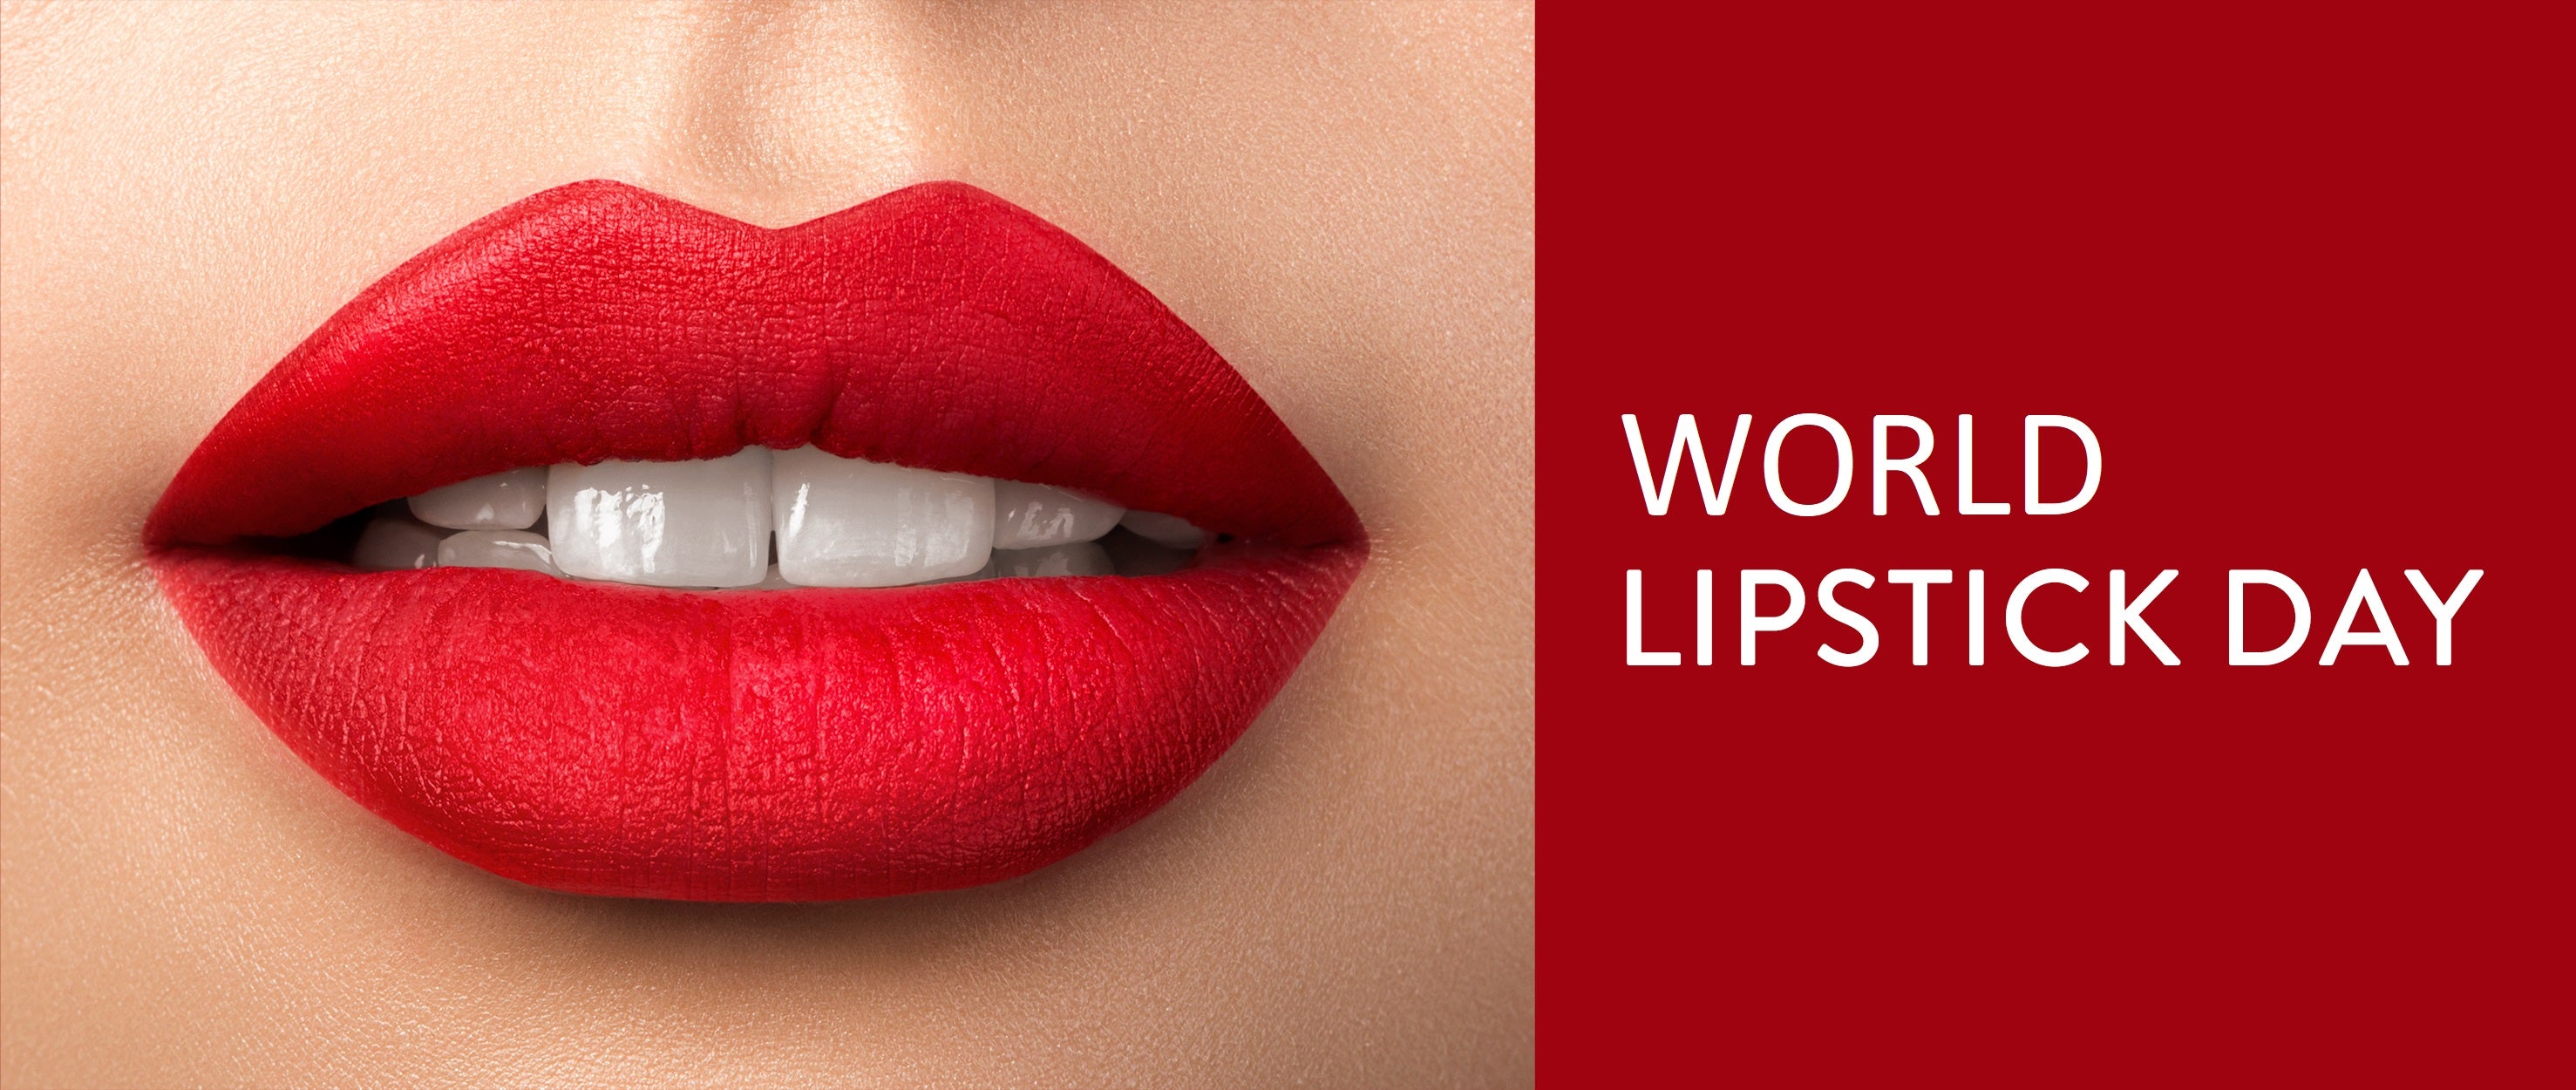 Celebrating Lipstick Day—A Day Dedicated to Lipstick Lovers! – Faces Canada